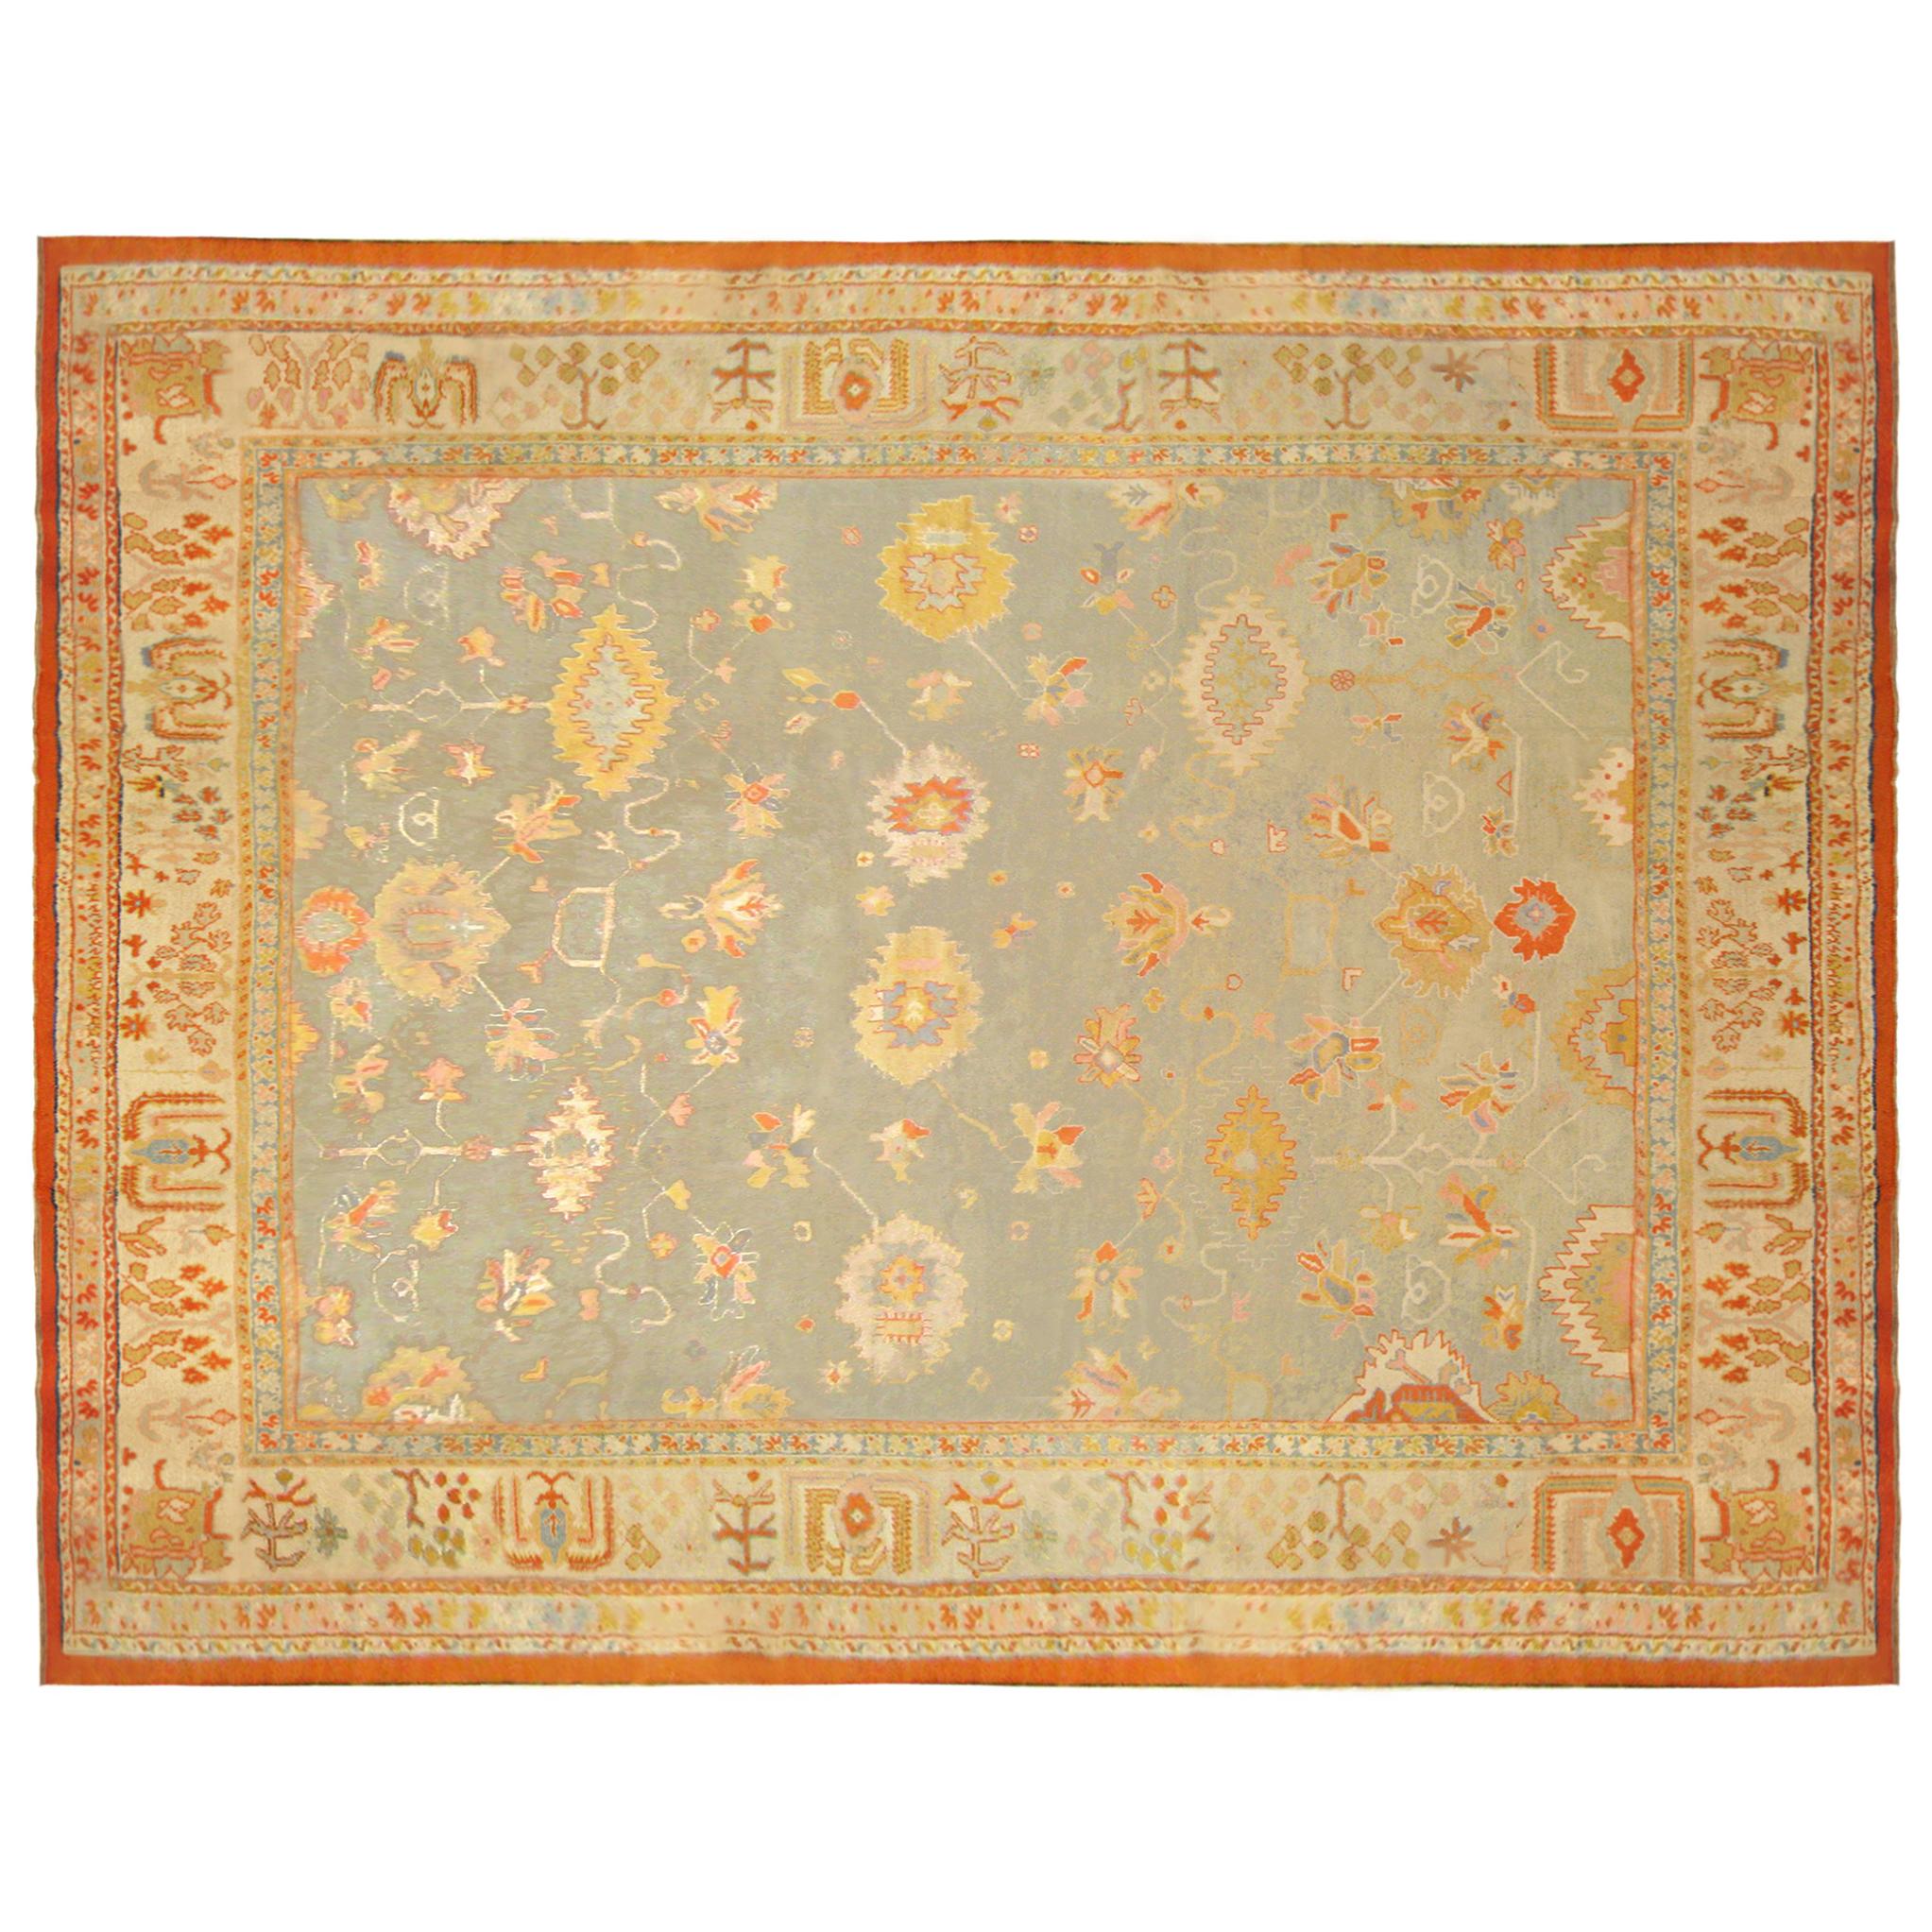 Antique Turkish Oushak Decorative Carpet, in Large Square Size with Soft Colors  For Sale